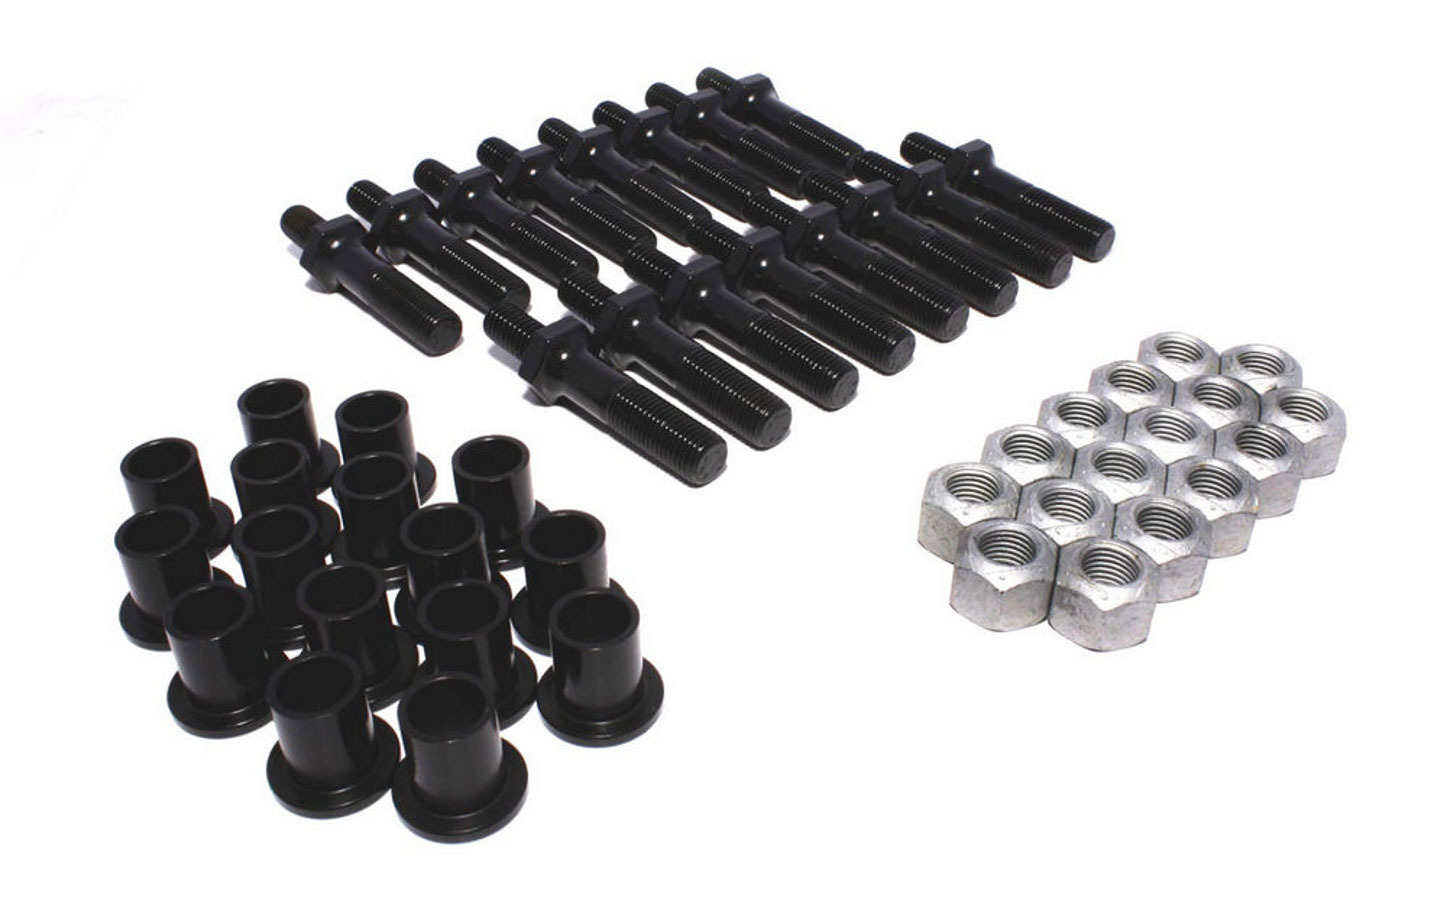 Comp Cams 4514-KIT Rocker Arm Nut, 7/16-20 in Thread, Conversion to Adjustable, Steel, Black Oxide, Big Block Chevy, Kit